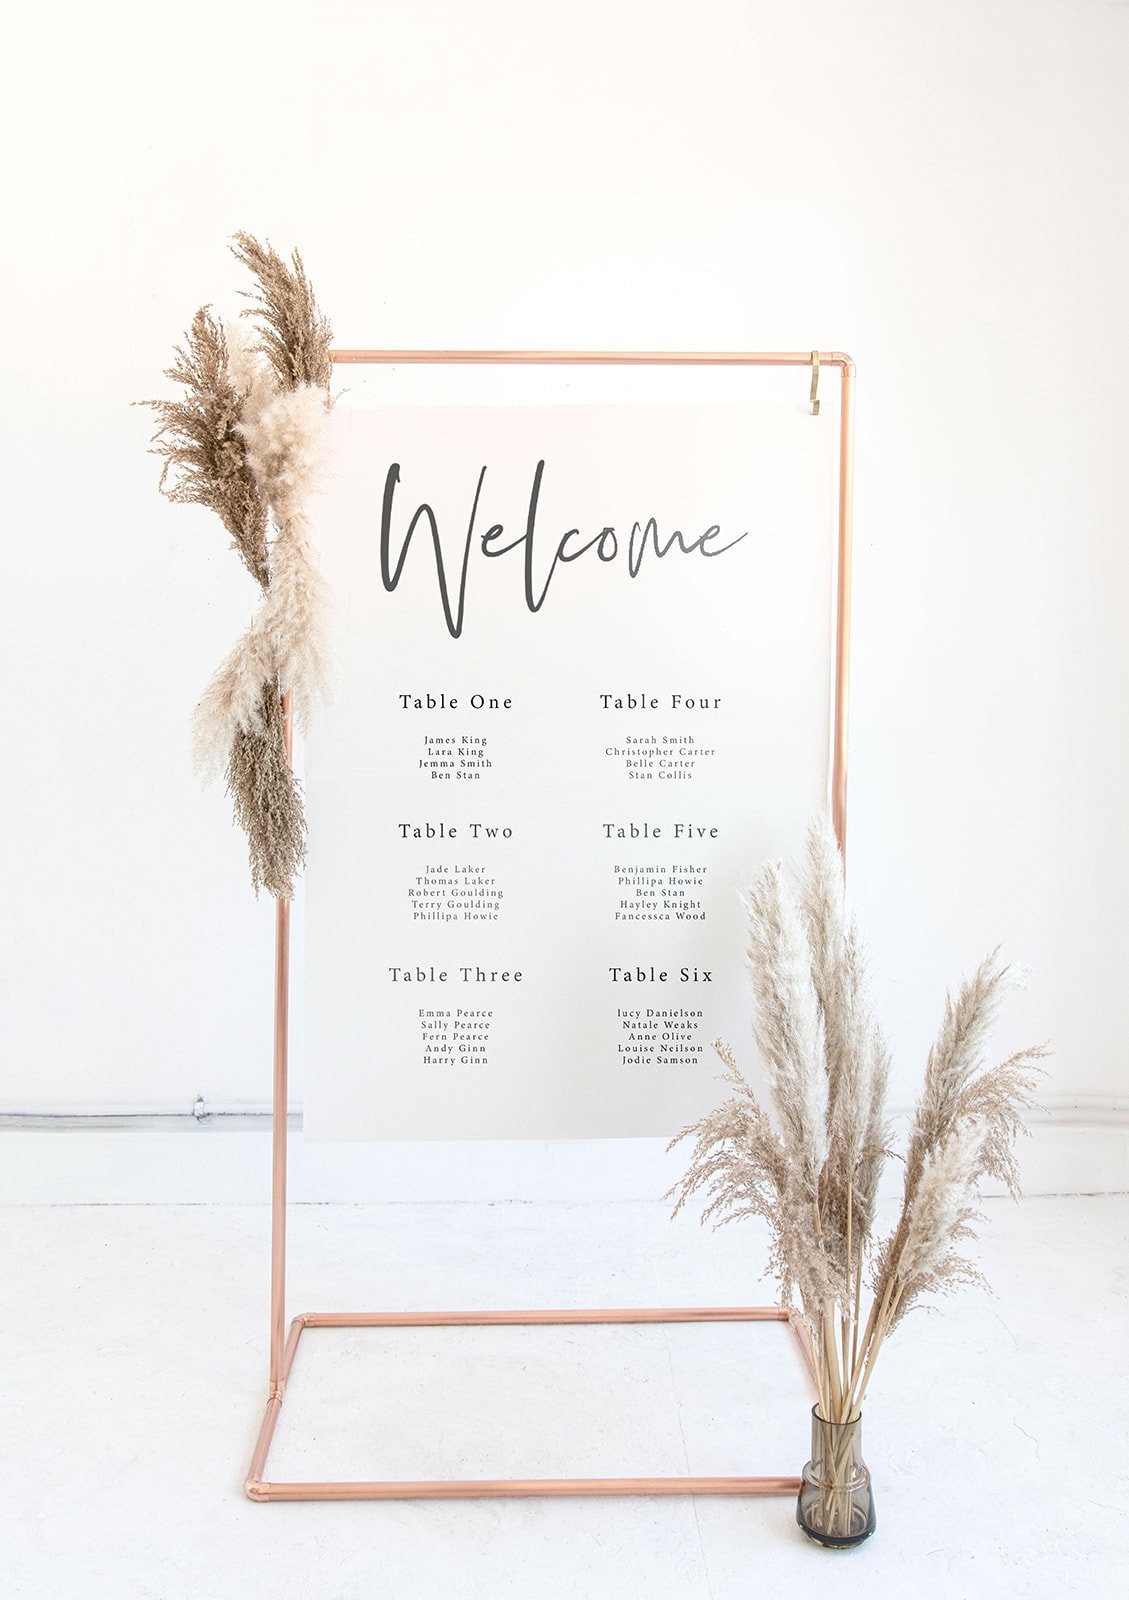 Copper Wedding Sign Stands and Easels reception Welcome Sign